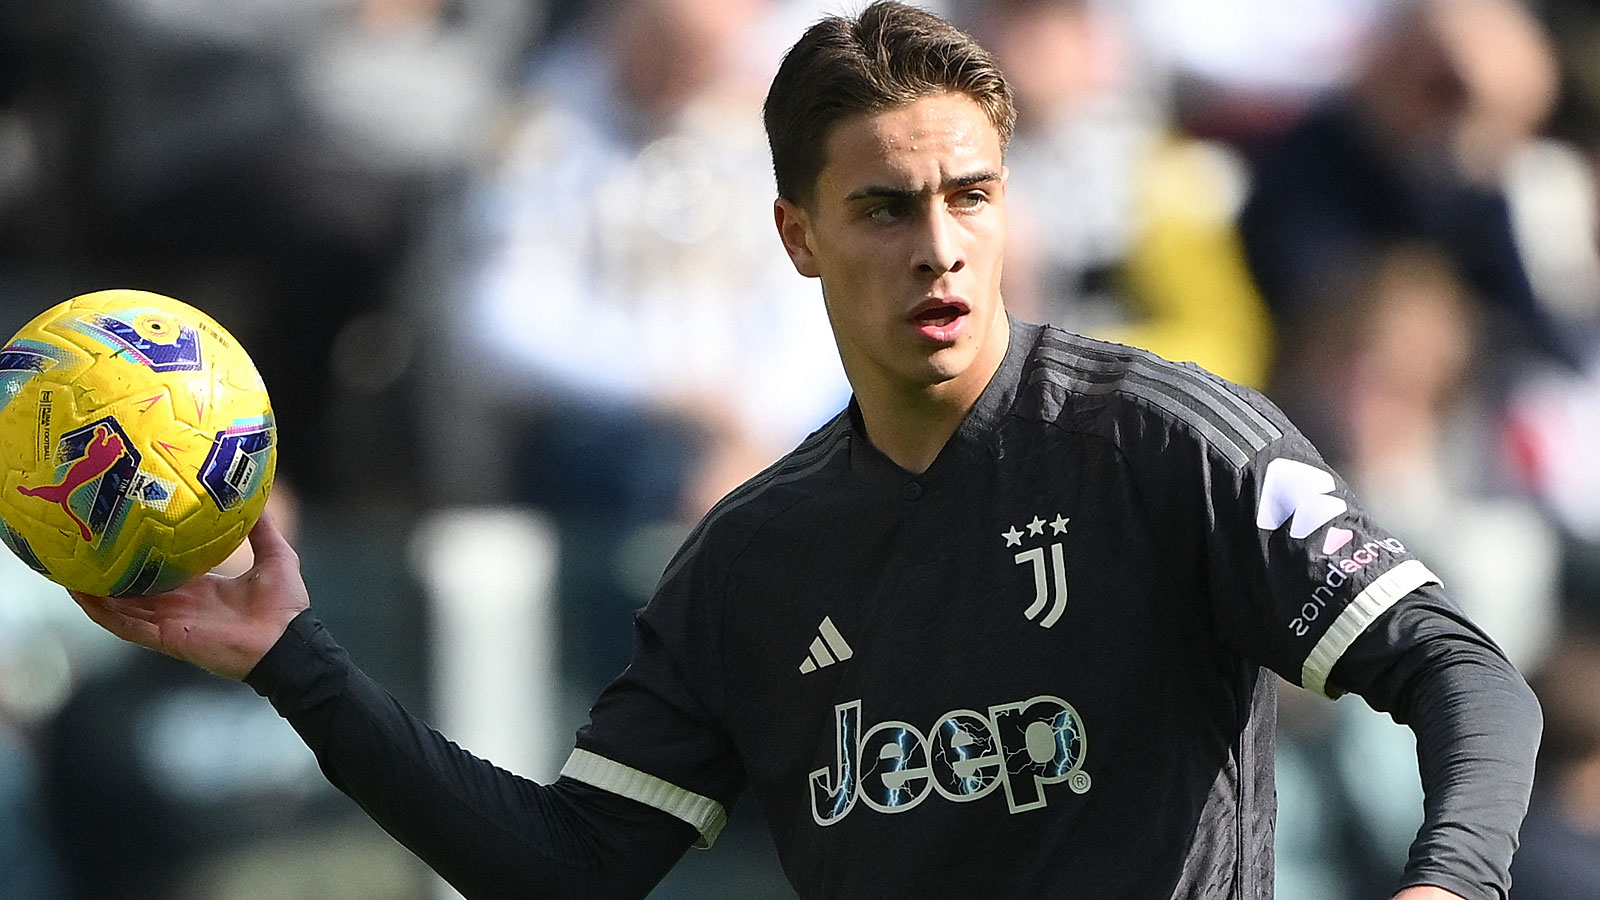 Kenan Yildiz will soon extend his contract with Juventus for the second time in a calendar year. He will then part ways with the agency Leaderbrocks,